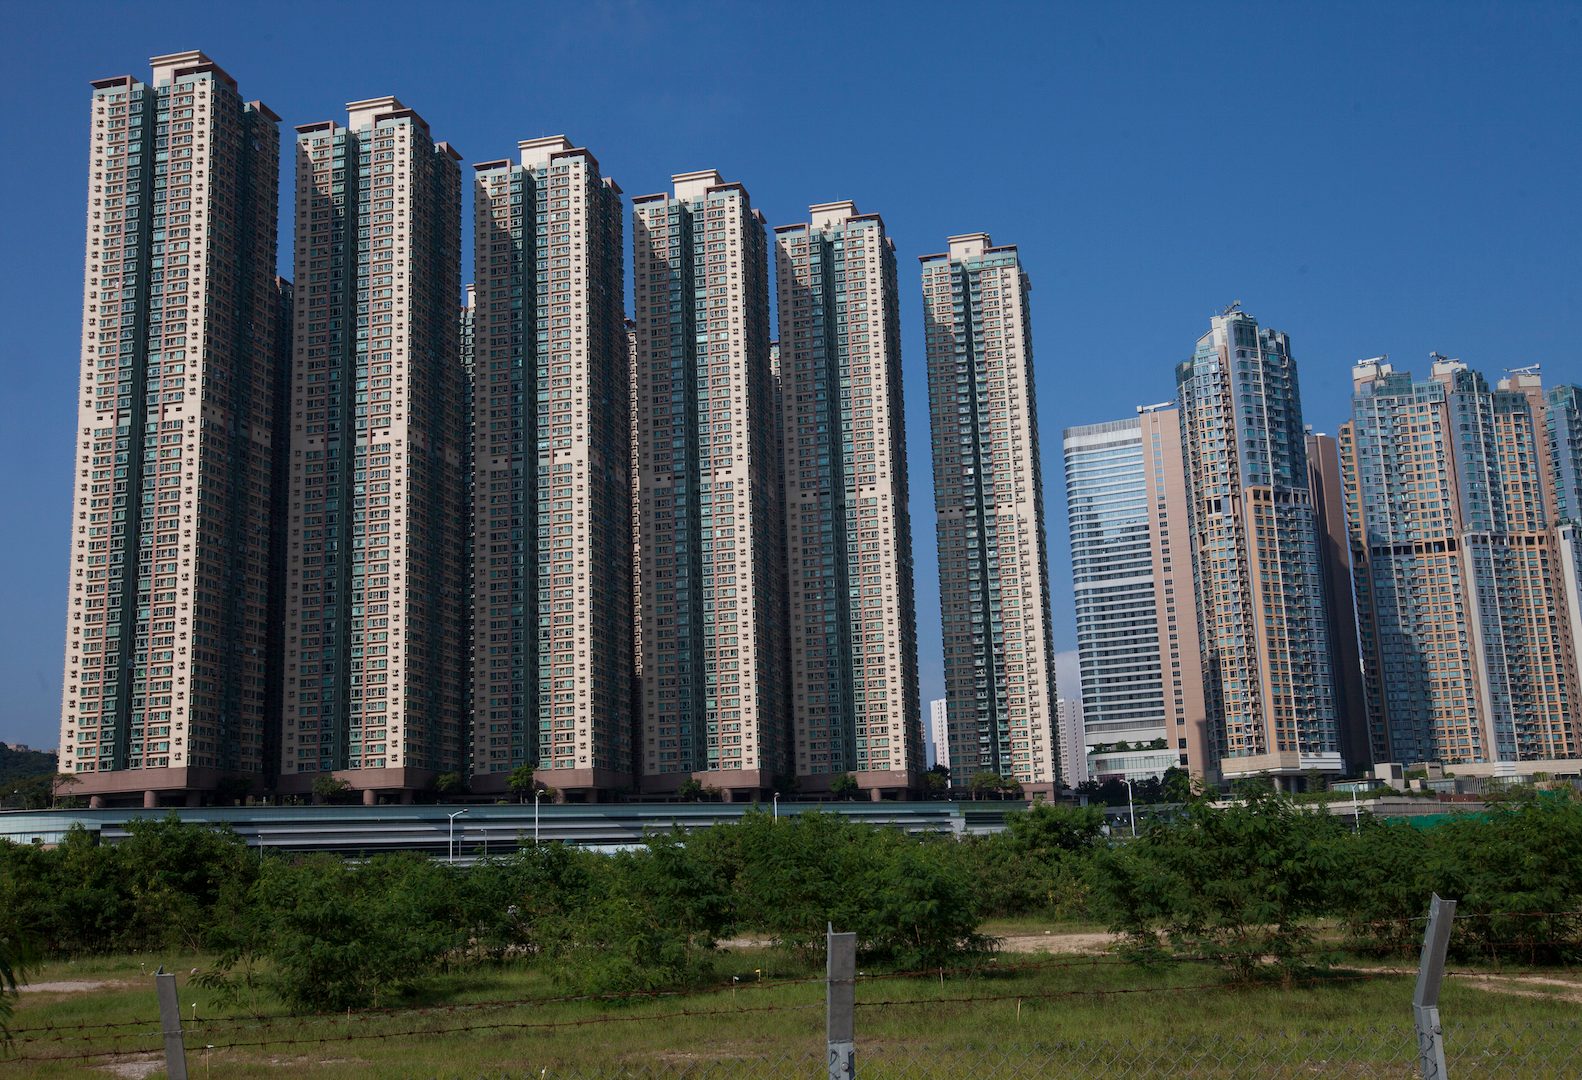 Hong Kong breaks record for least affordable housing – survey